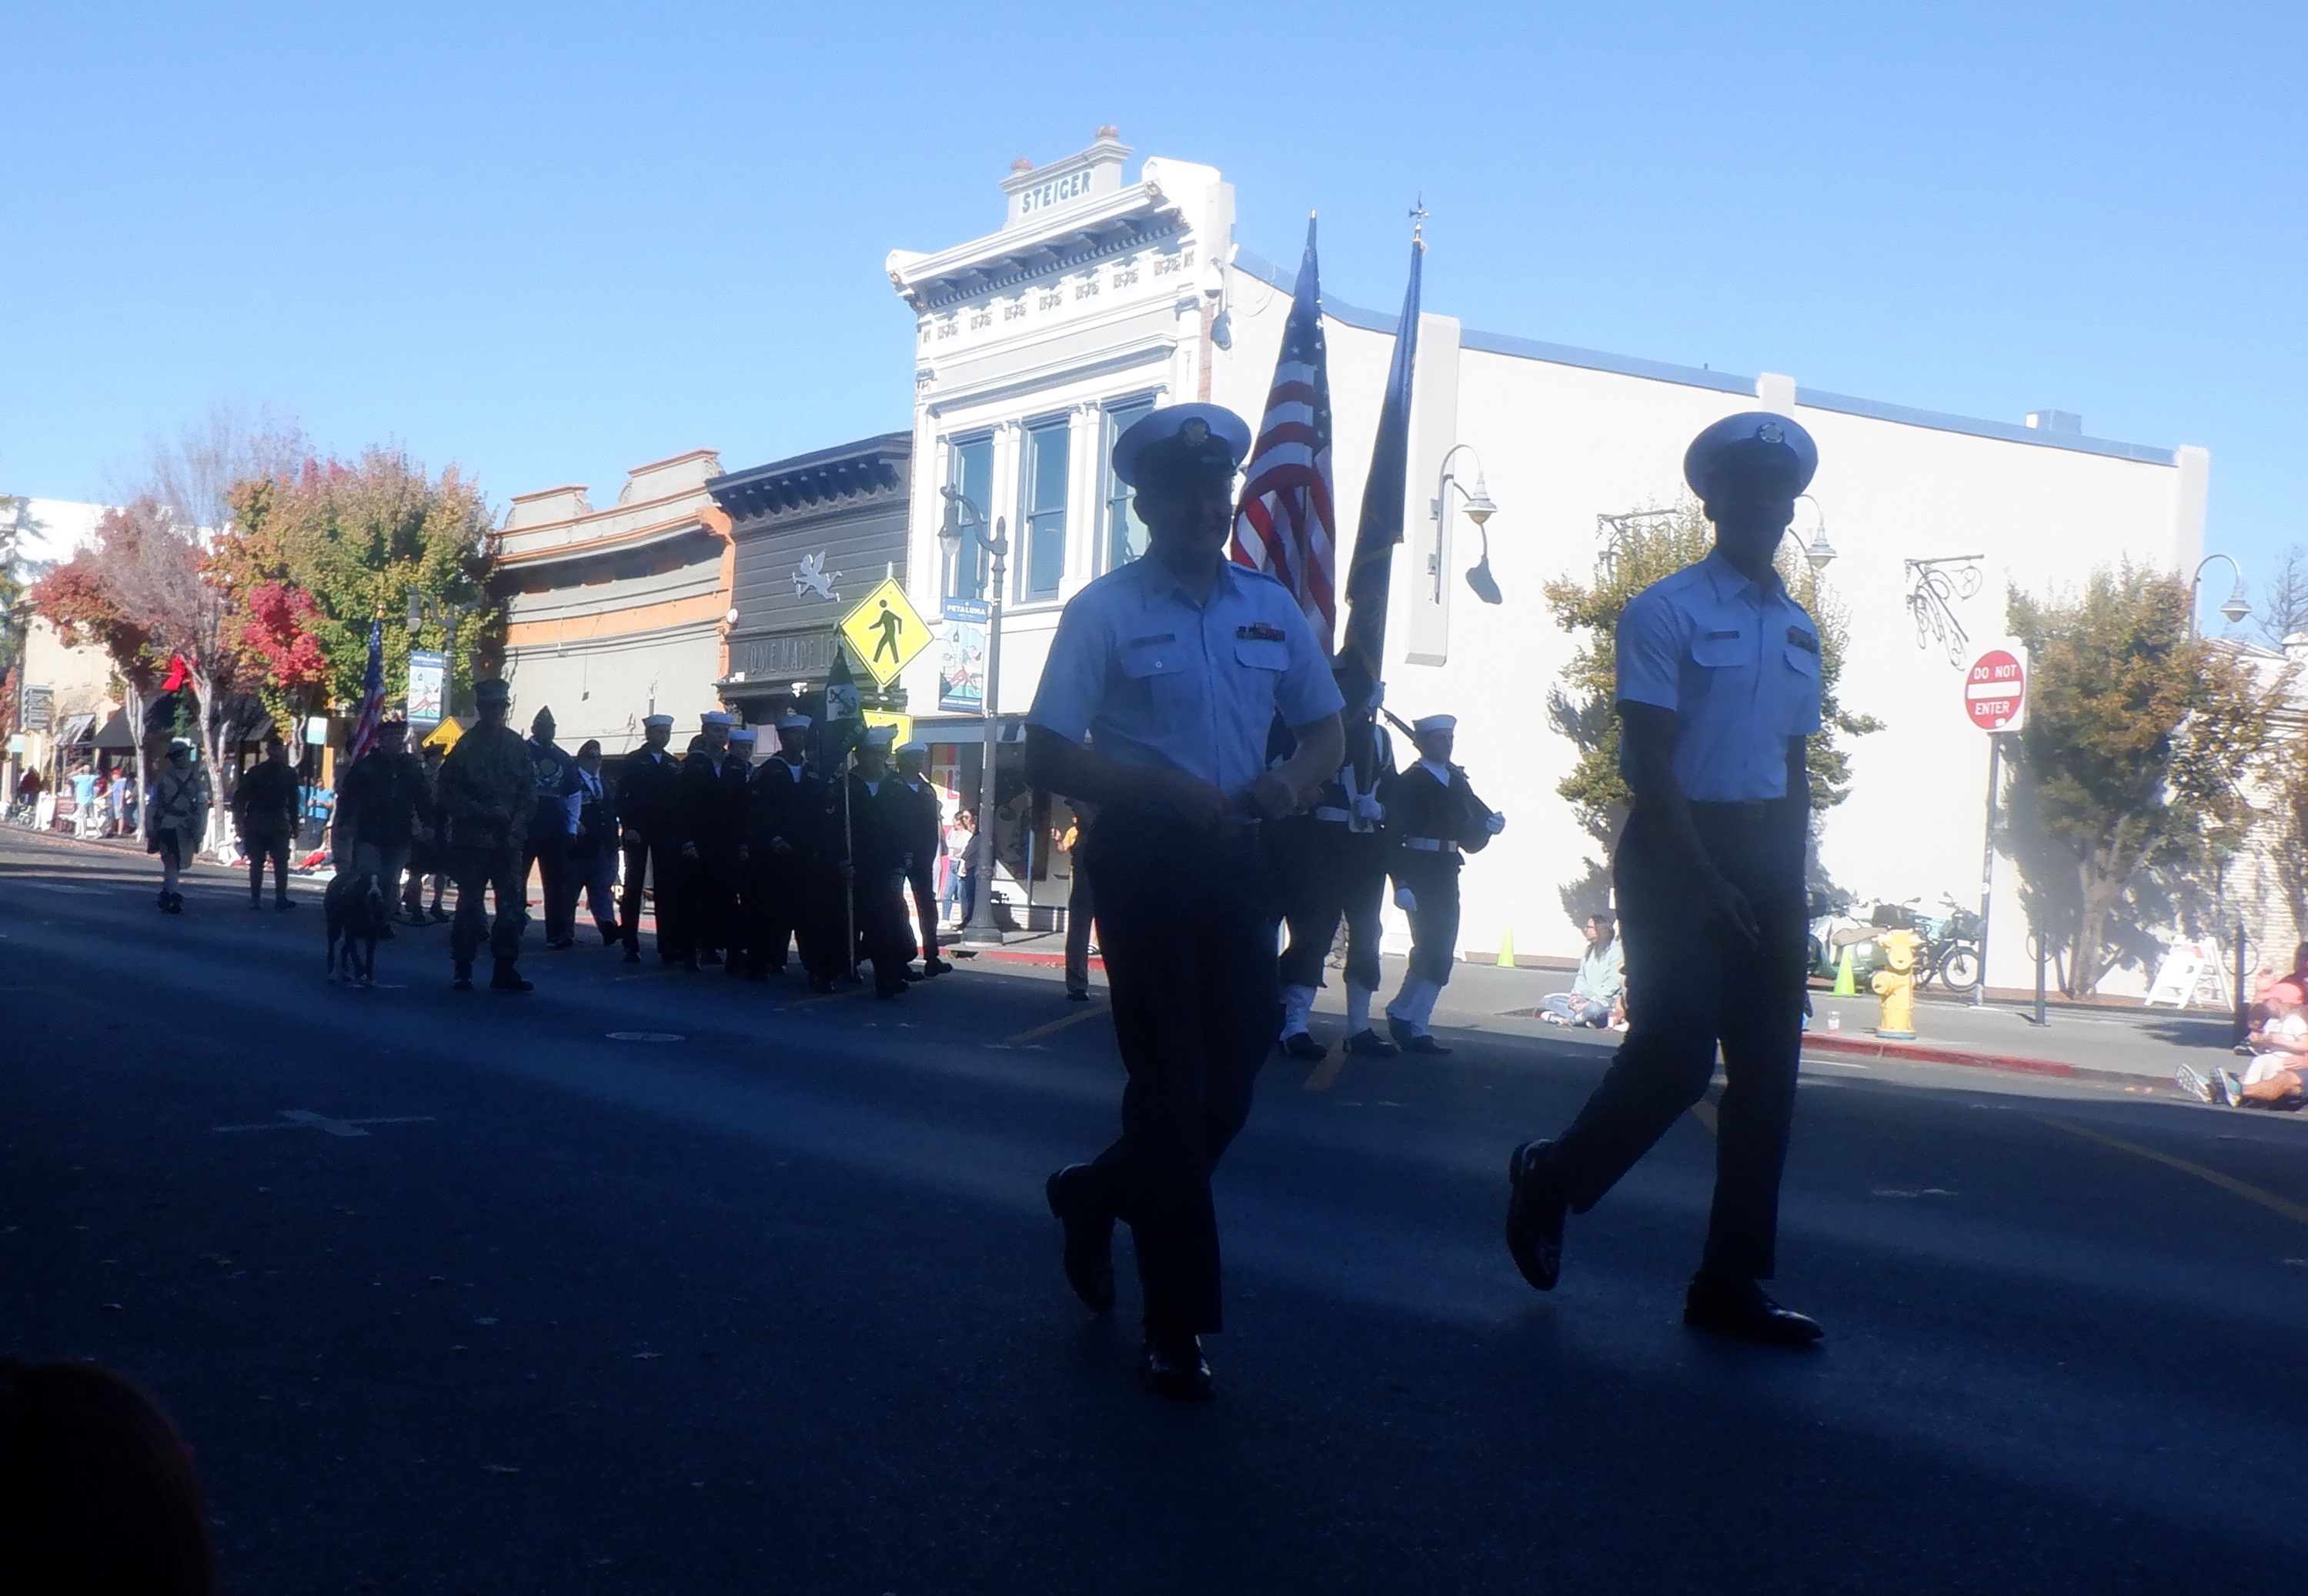 A photo from the Vets day parade that didn't turn out so good